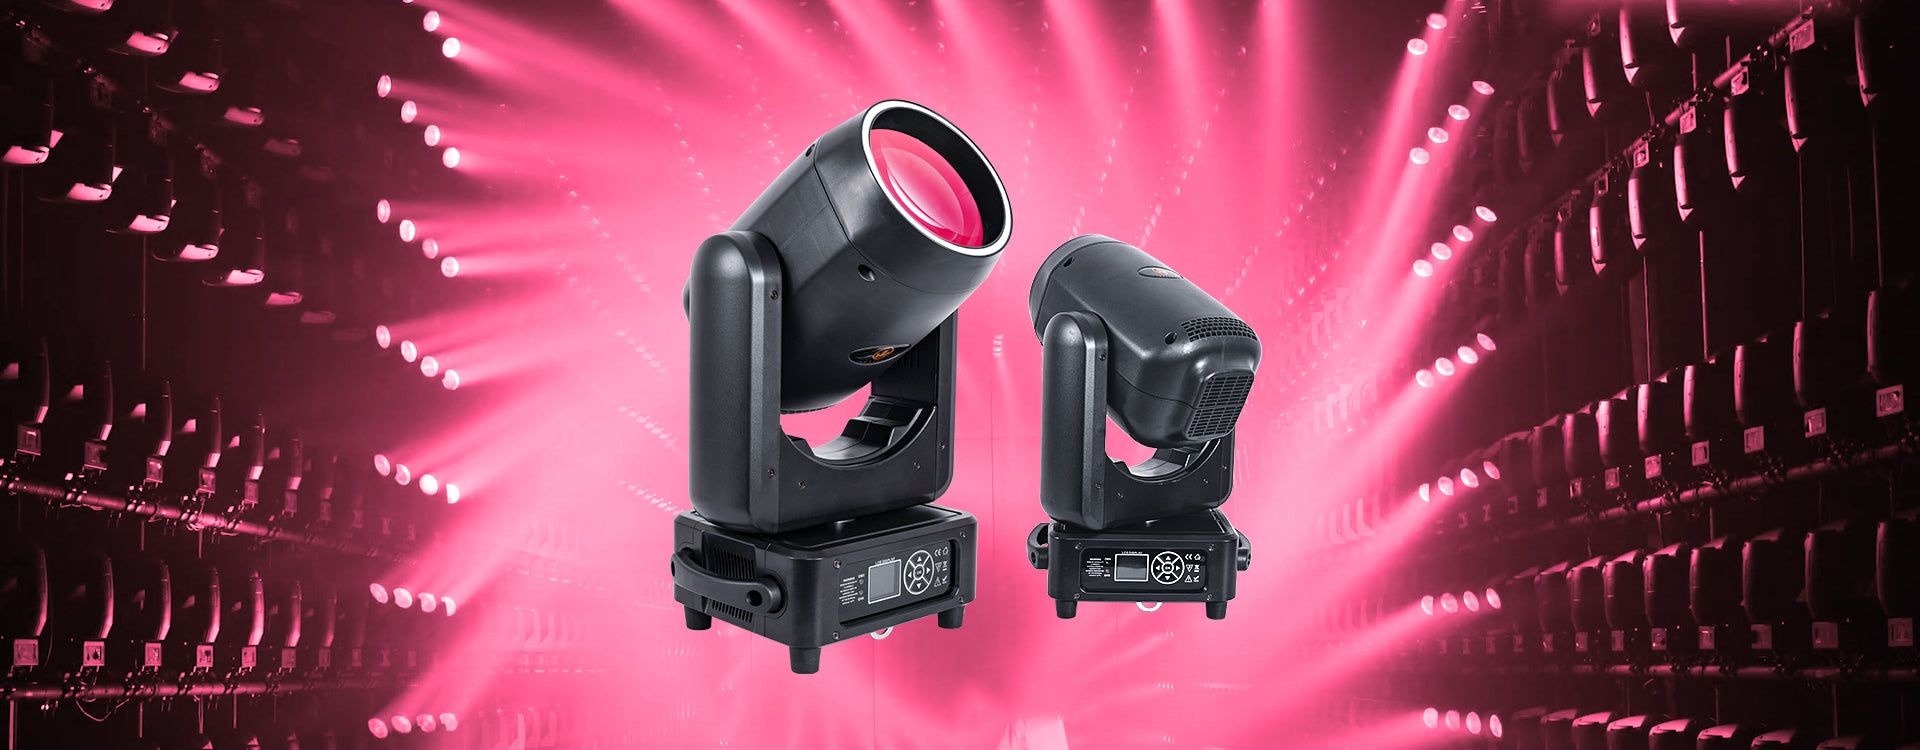 IMRELAX 150W MODULE BEAM MOVING HEAD LIGHT IN THE NICE EVENT SHOW